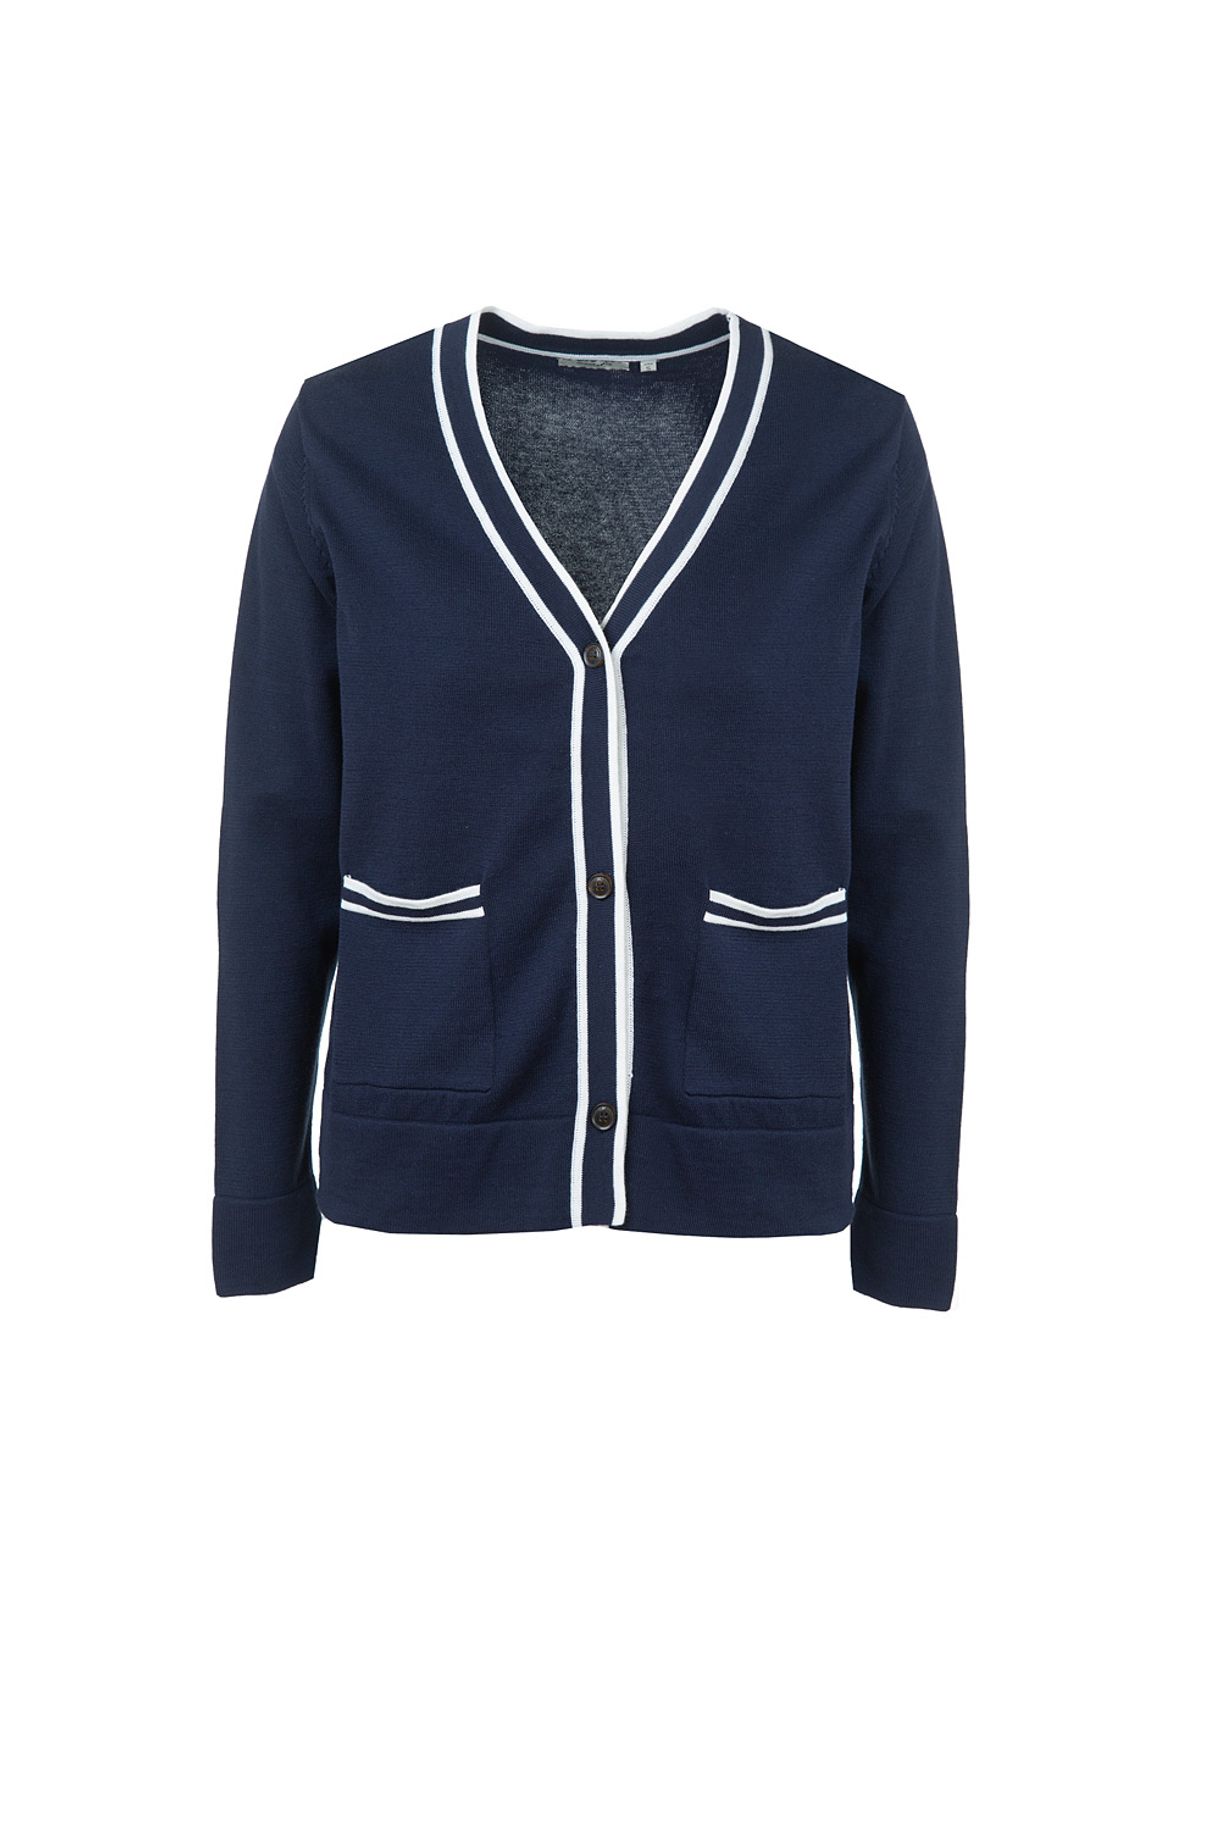 MC193 CONTRAST KNITTED JACKET